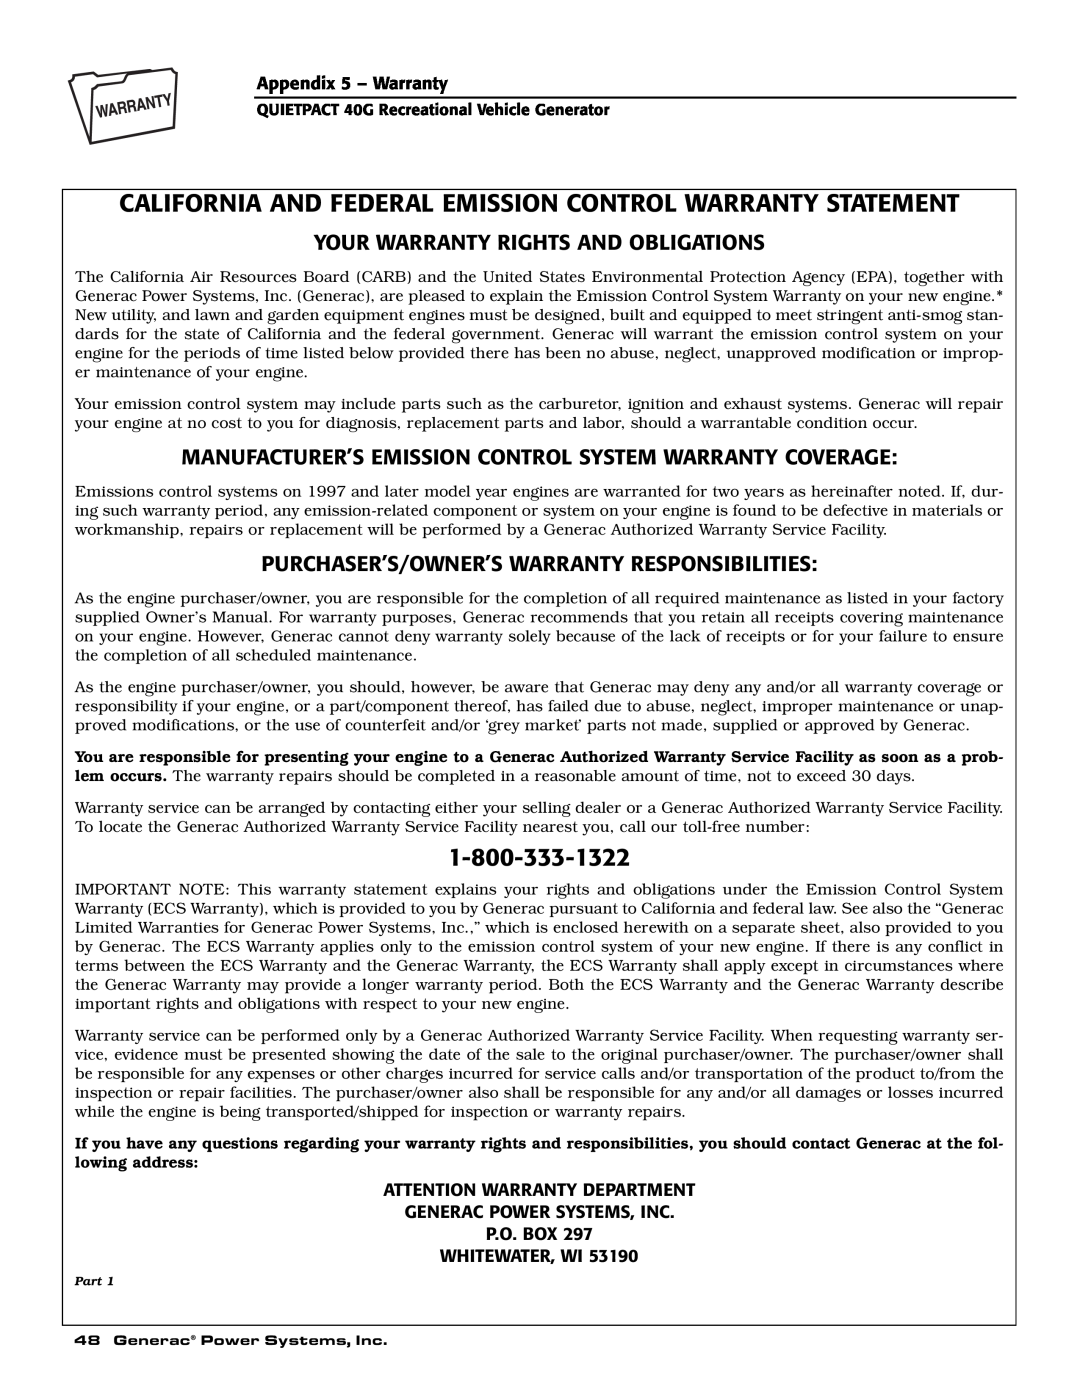 Generac 004700-0 California And Federal Emission Control Warranty Statement, Your Warranty Rights And Obligations 